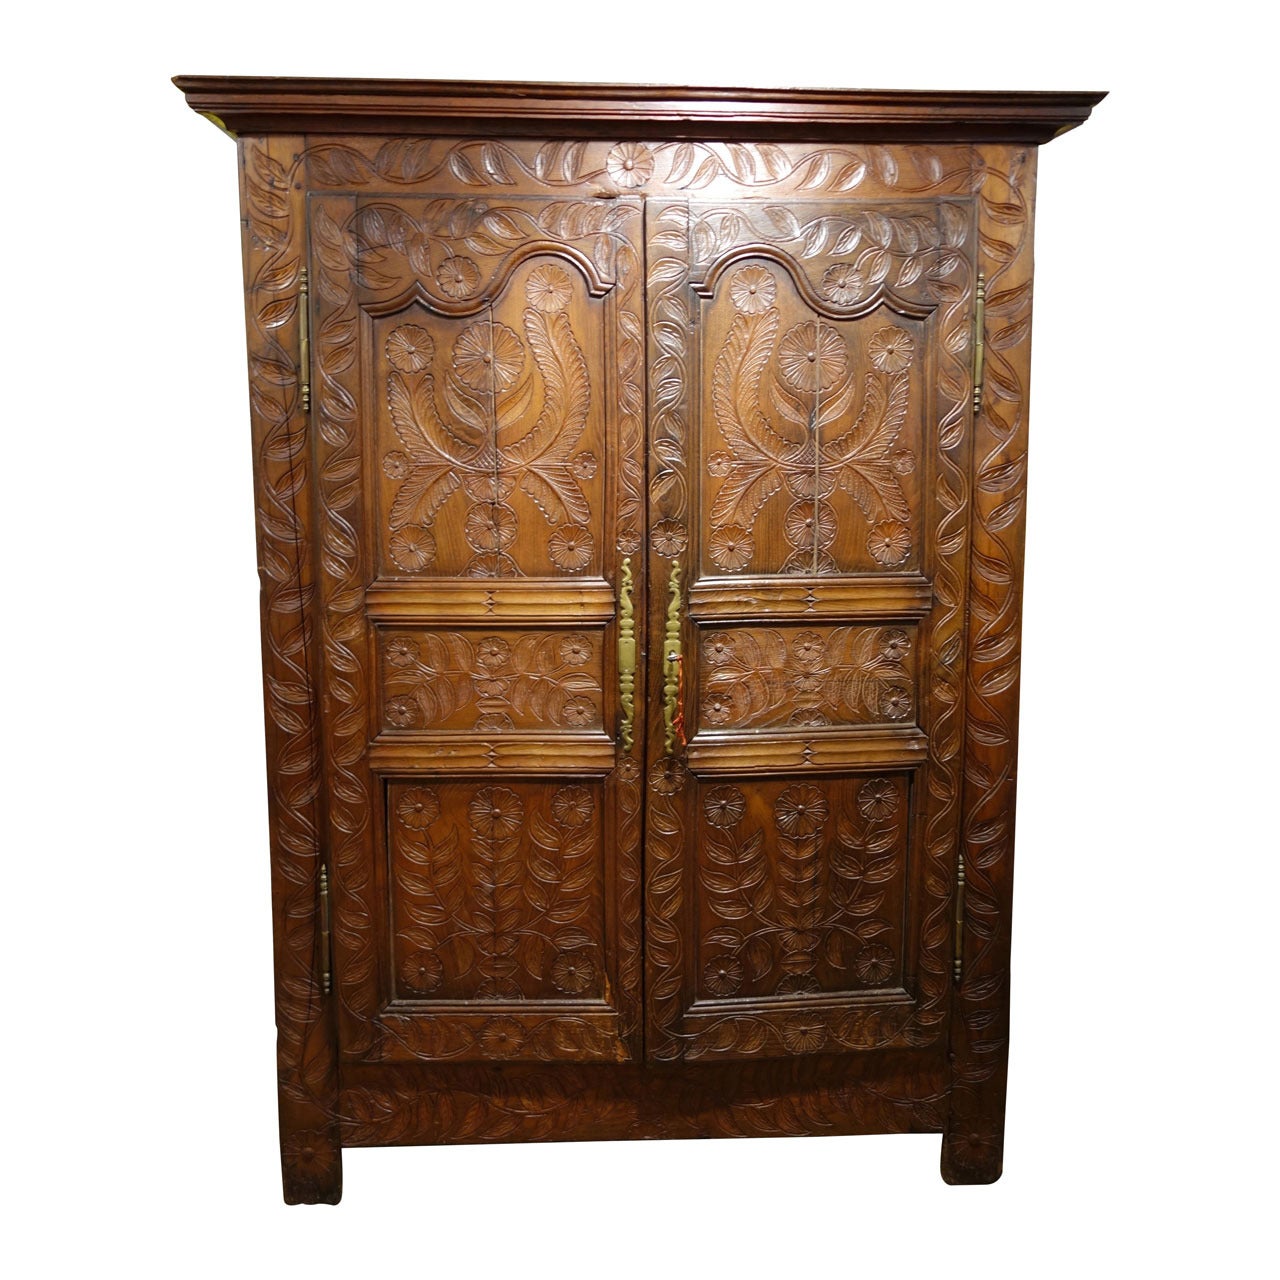 Early 19th Century French Armoire with Folky Elaborate Carvings